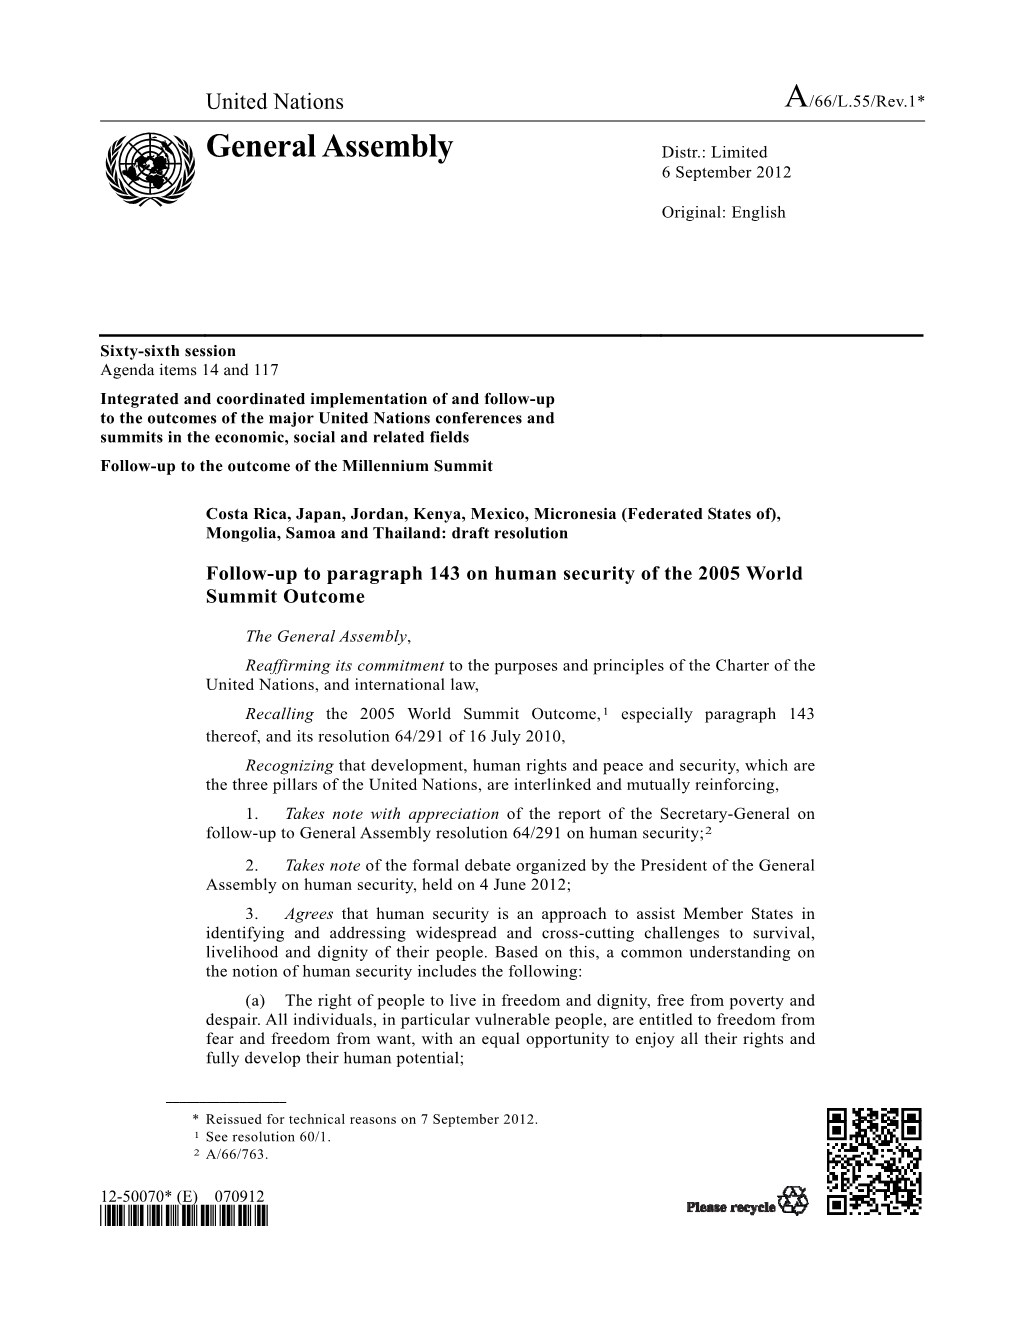 Follow-Up to Paragraph 143 on Human Security of the 2005 World Summit Outcome[PDF]